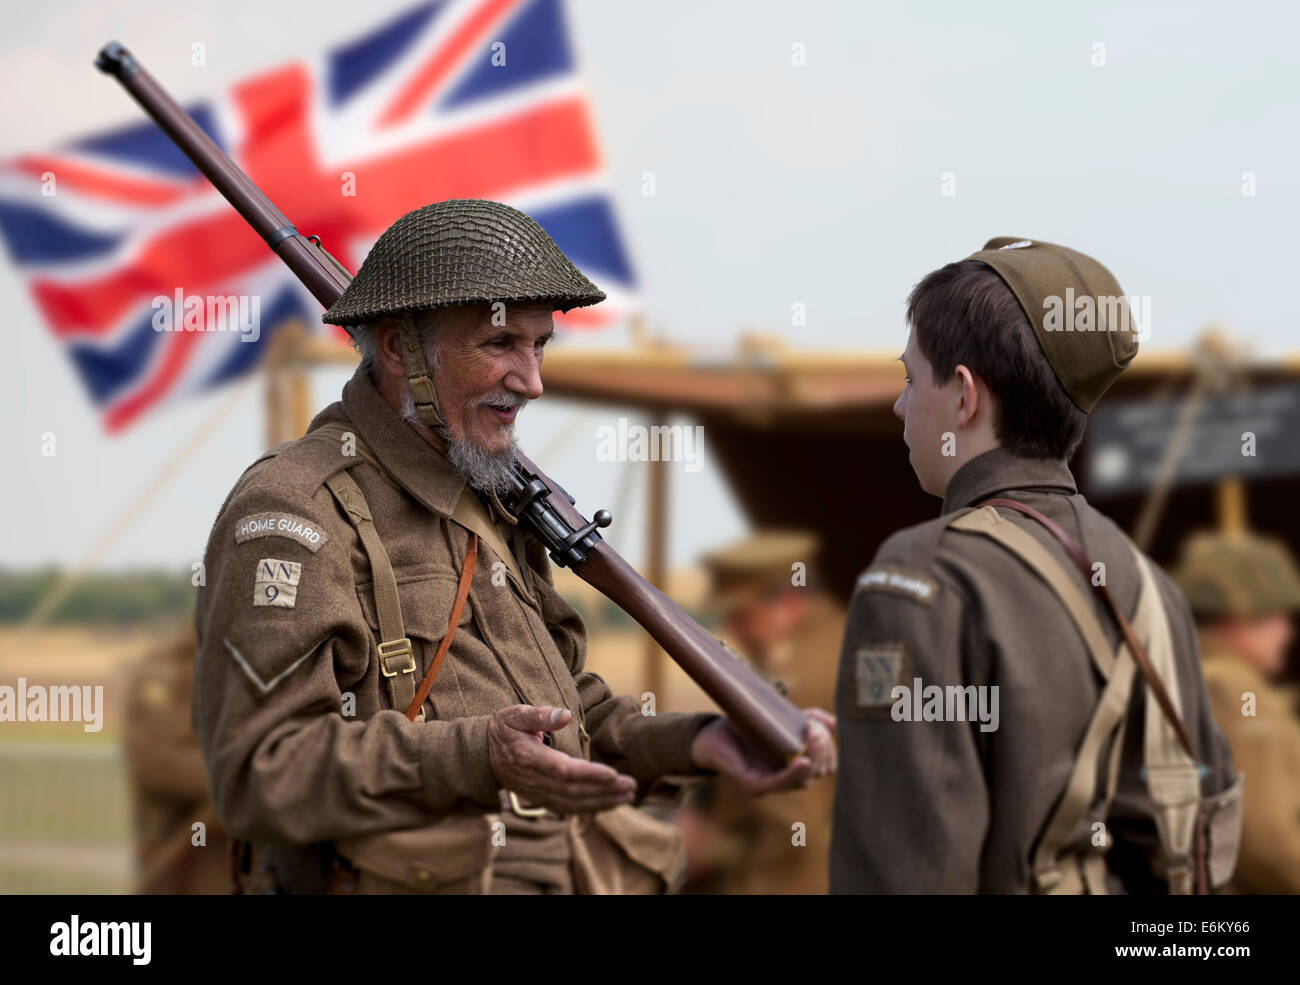 The home guard under the union jack flags. Stock Photo